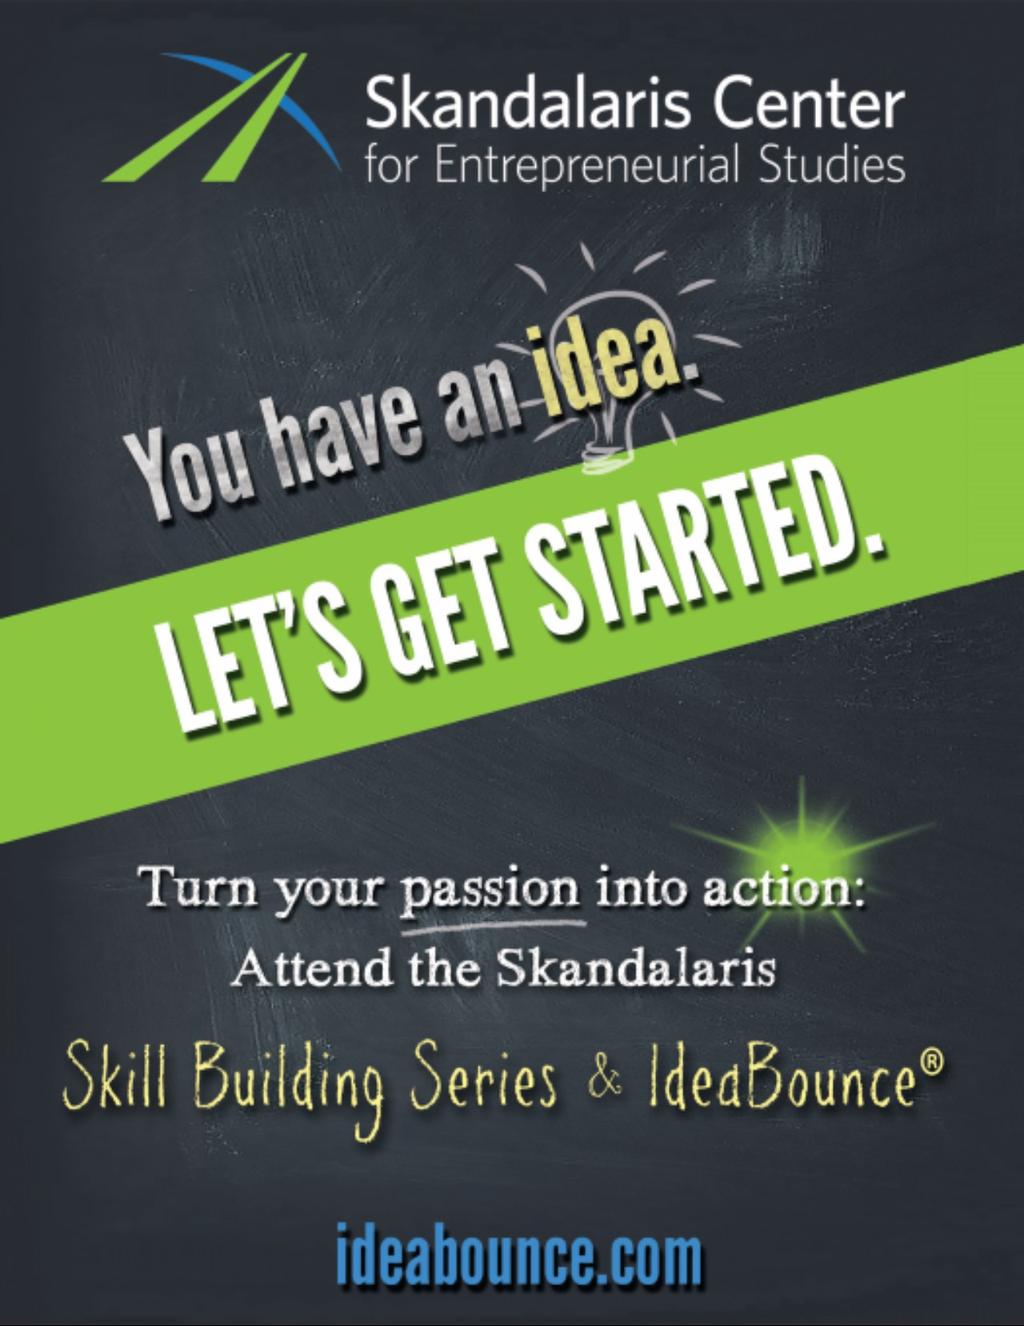 Skandalaris Skill Building Series a hands-on, real-life, practical series Each session builds upon the other to give you the tools to start your venture IdeaBounce pitch your idea, get feedback and